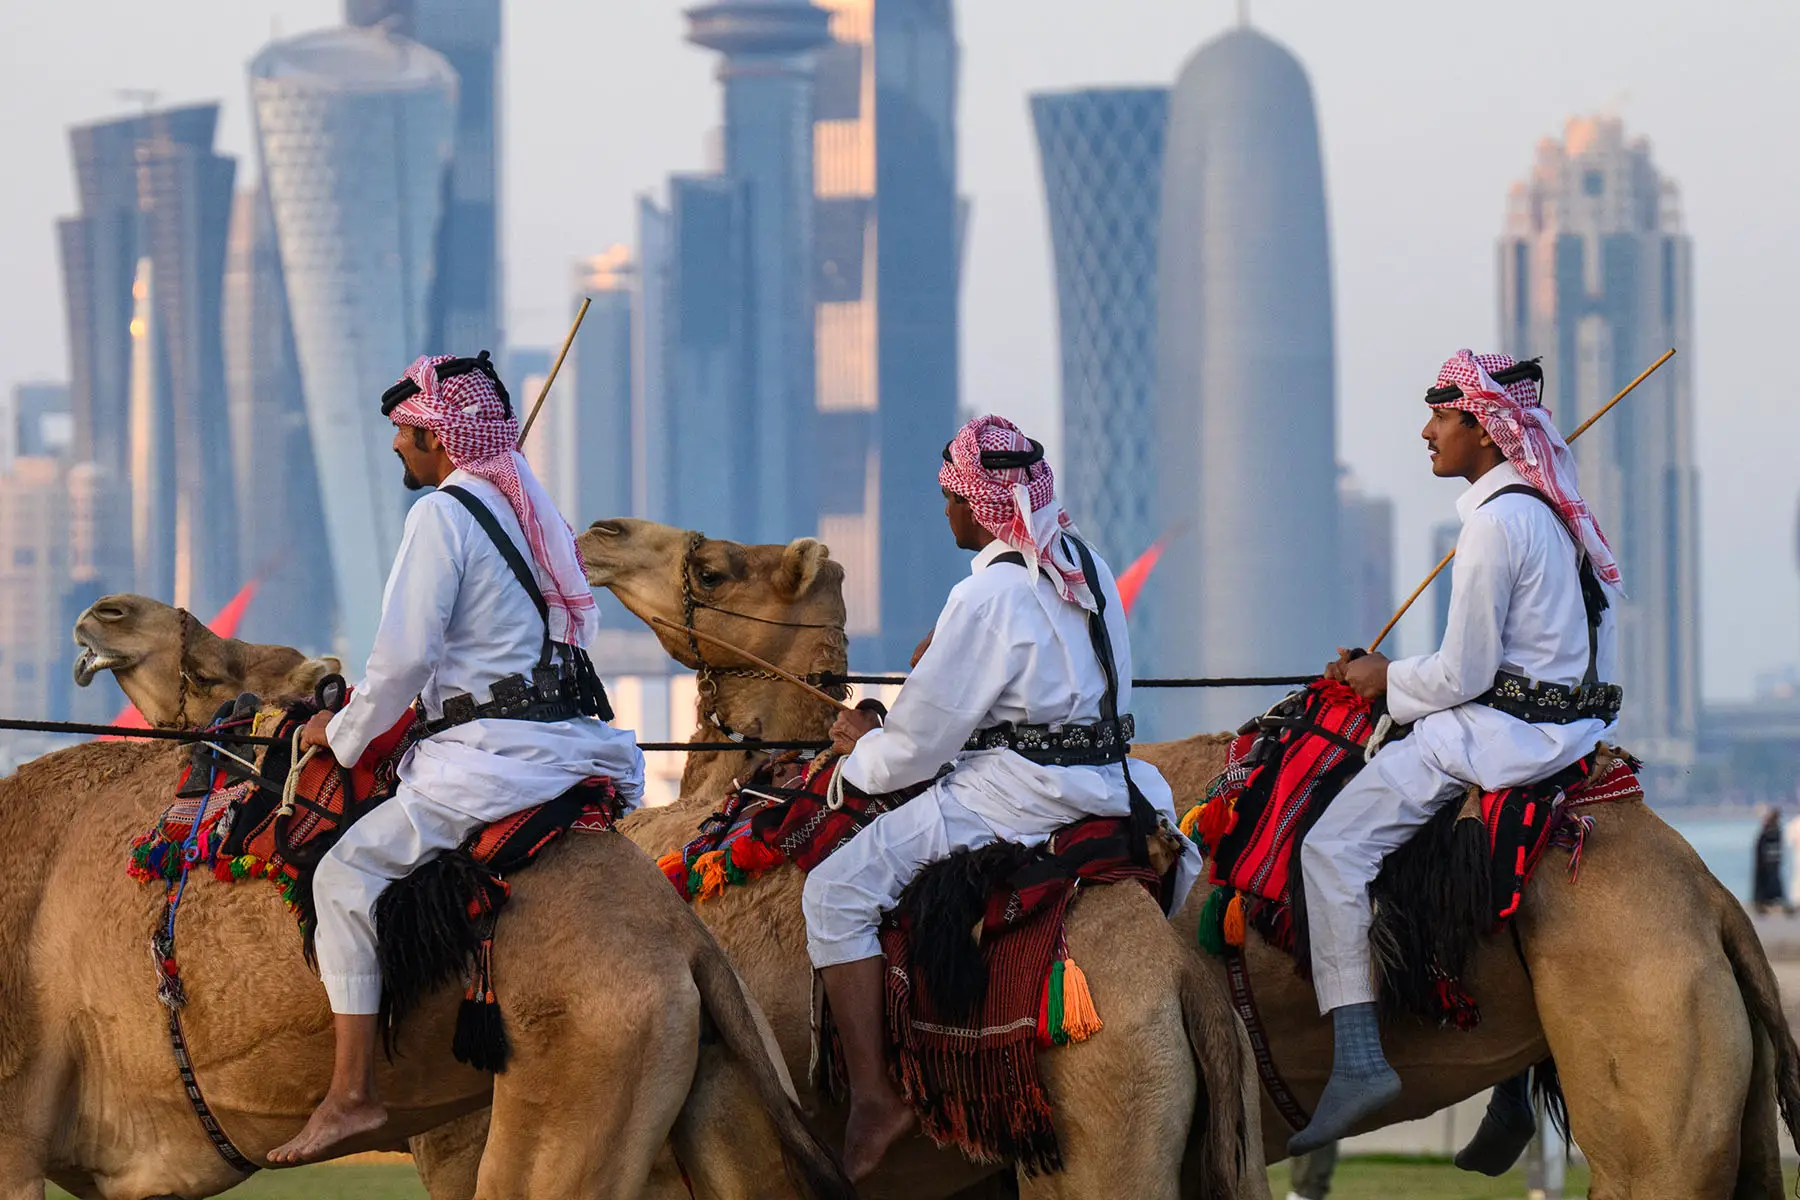 Mounted security forces ride their camels along the Corniche beach promenade.